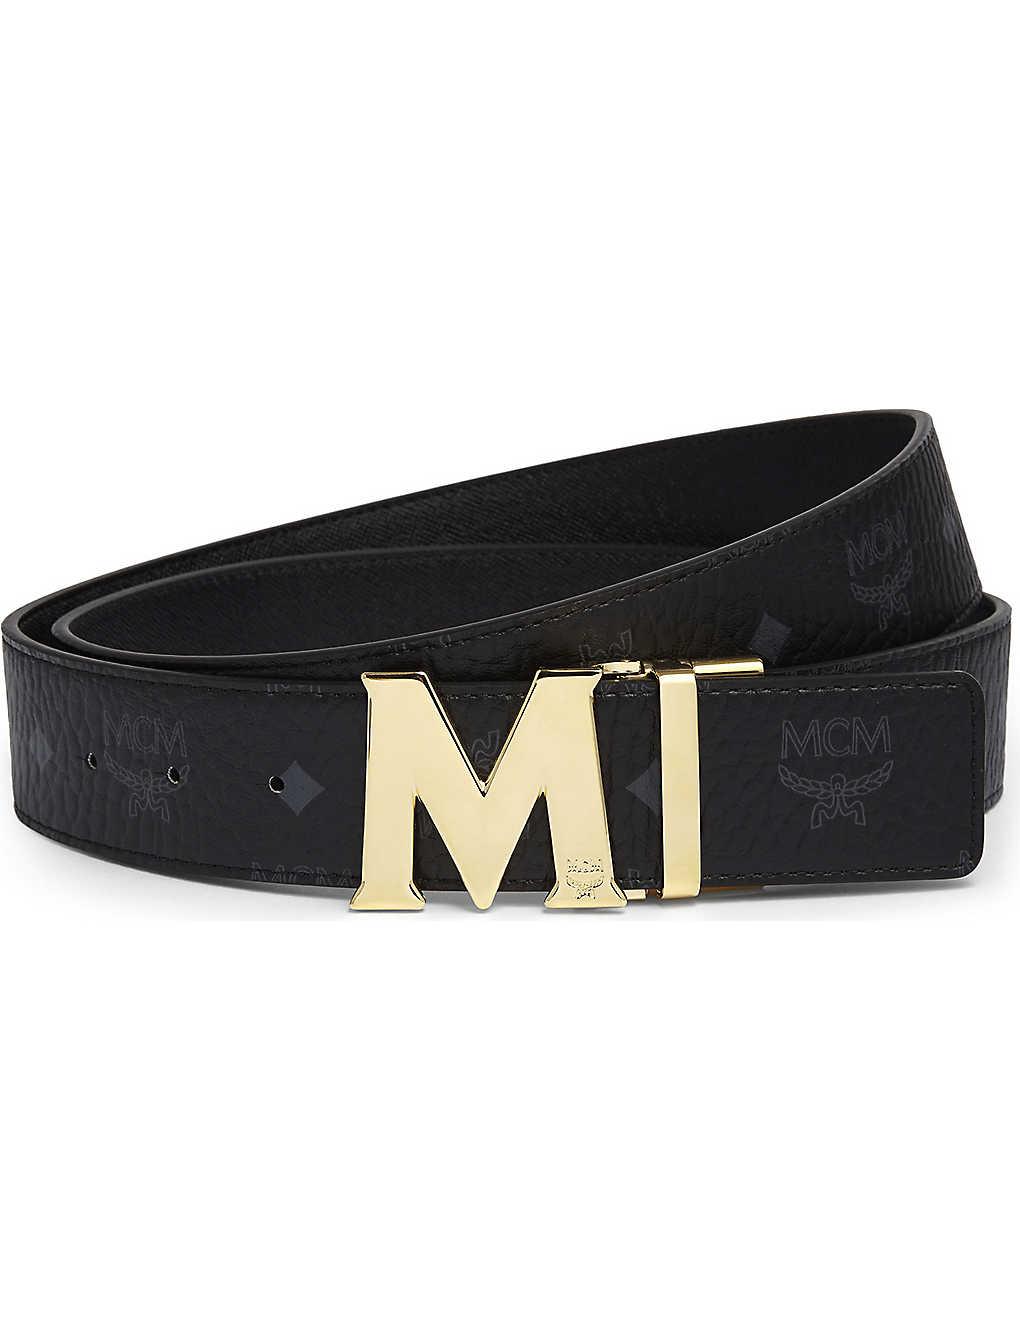 MCM Claus Reversible Saffiano Leather Belt in Black for Men - Lyst